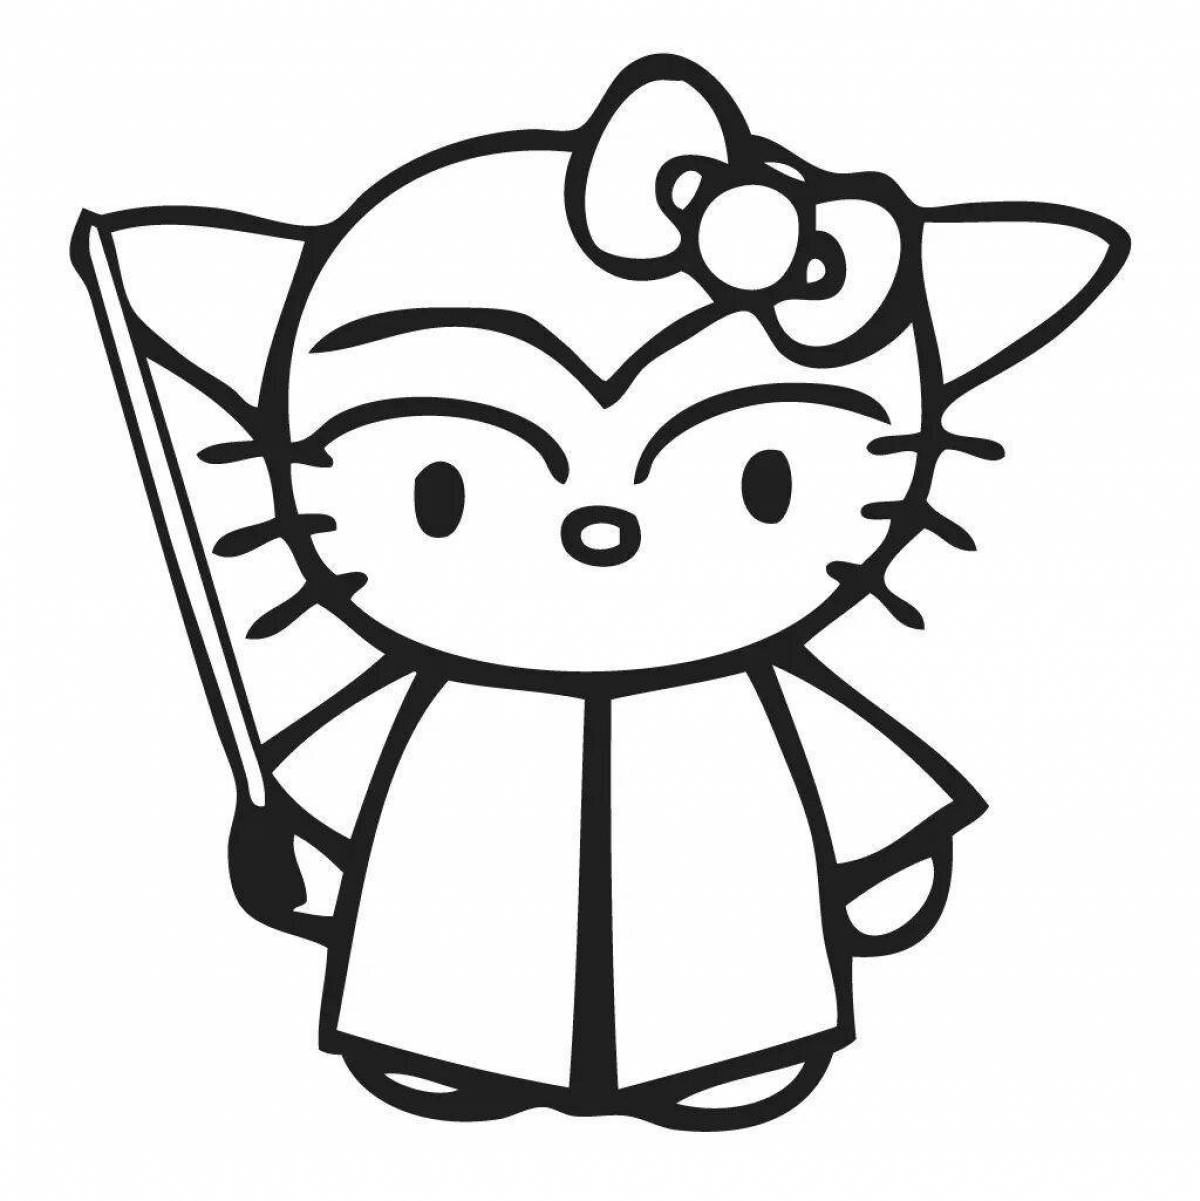 Exquisite kuromi many coloring pages